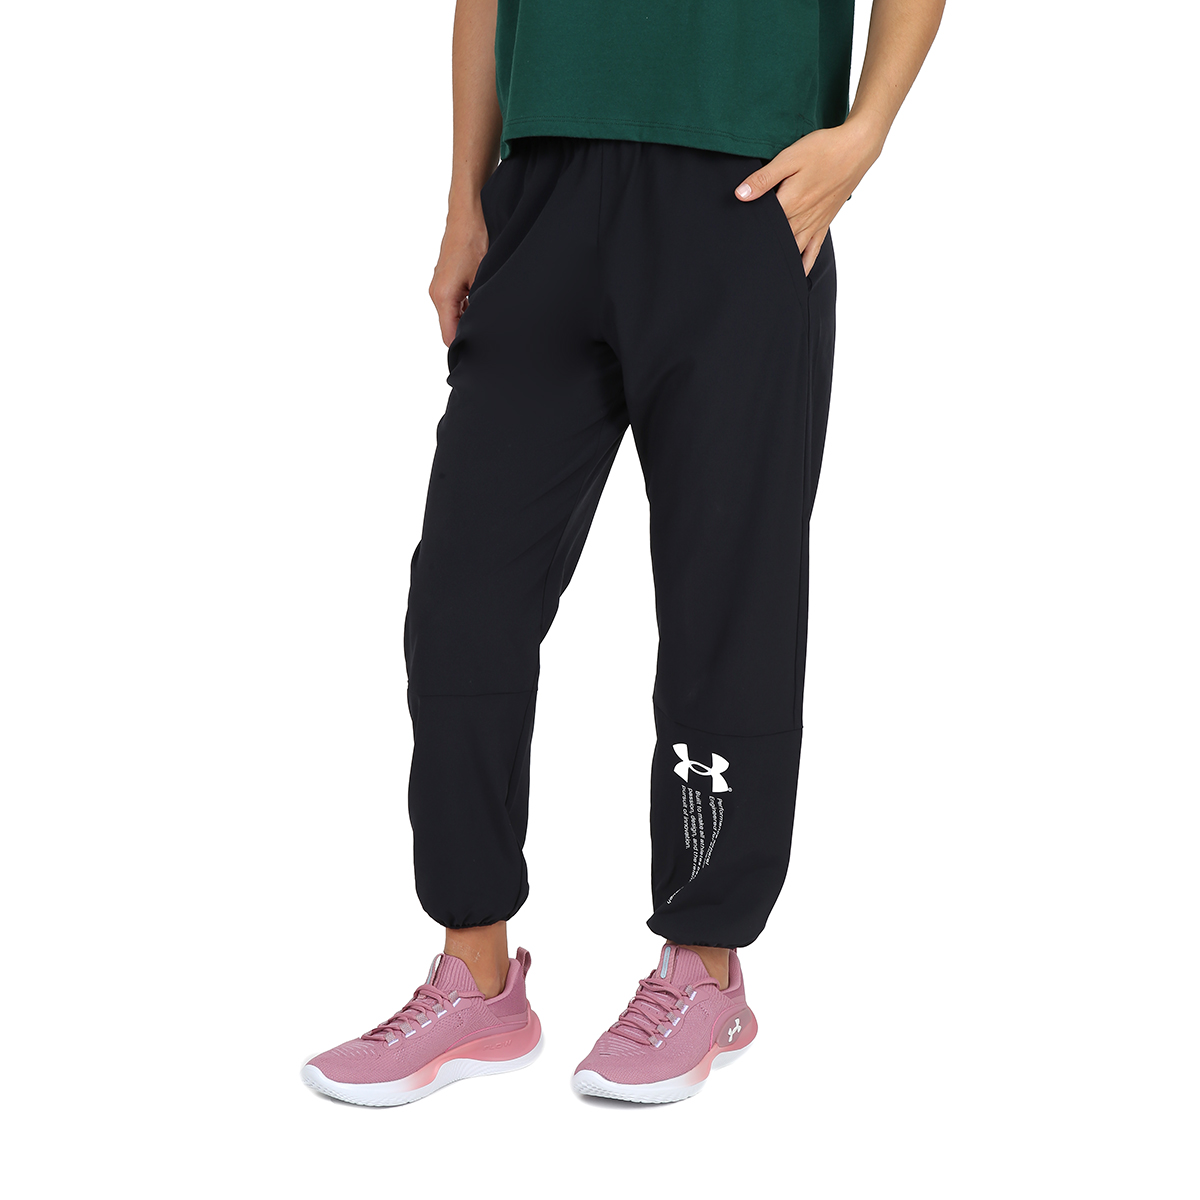 Pantalón Entrenamiento Under Armour Woven Graphic Mujer,  image number null